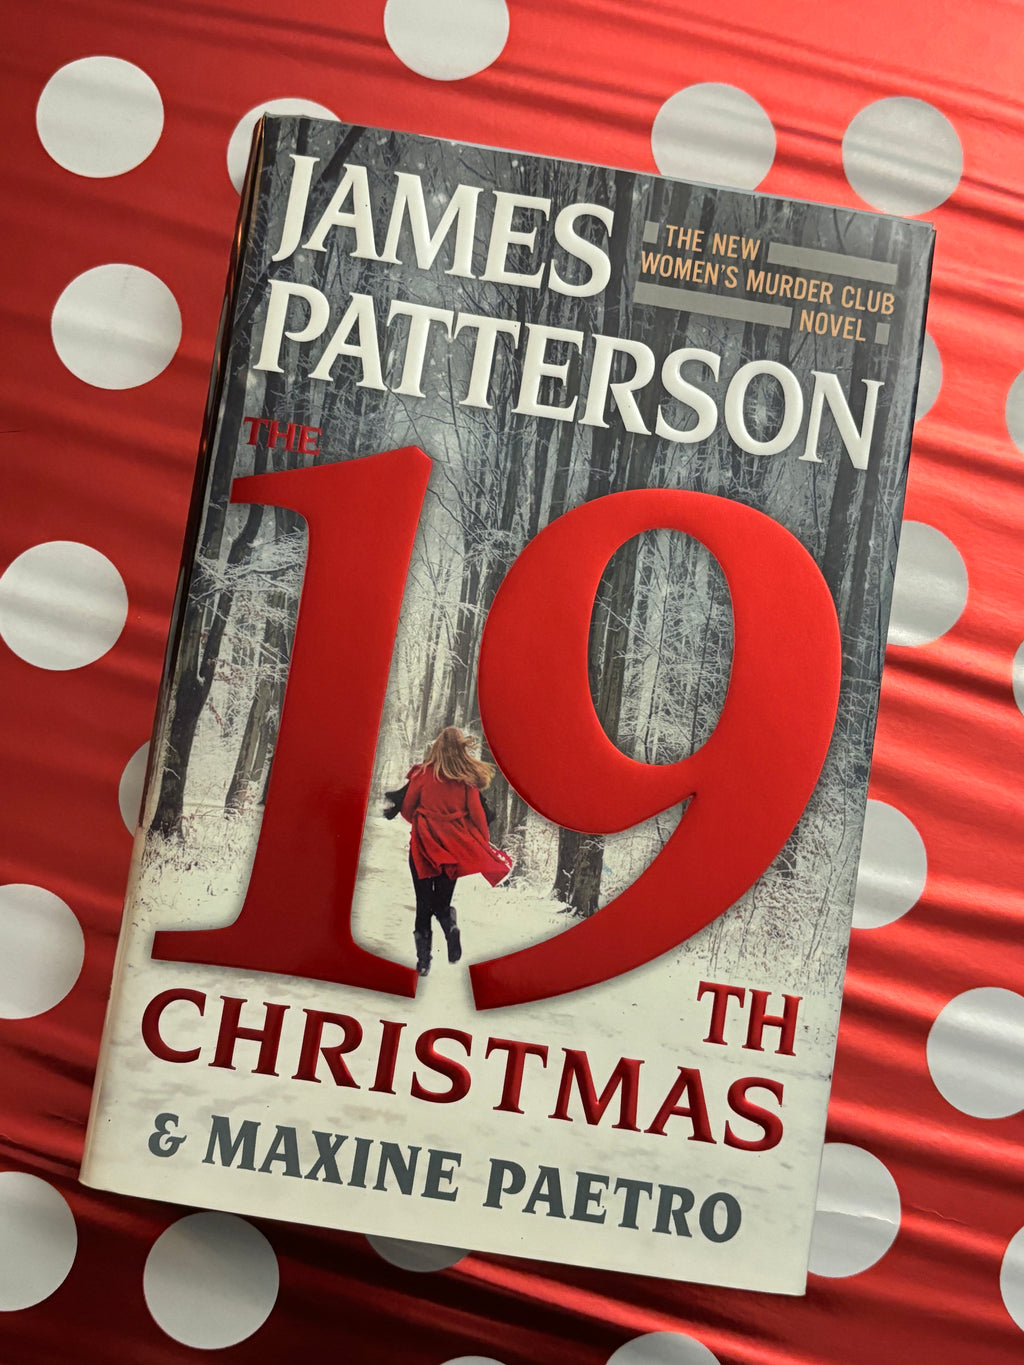 The 19th Christmas- By James Patterson & Maxine Paetro